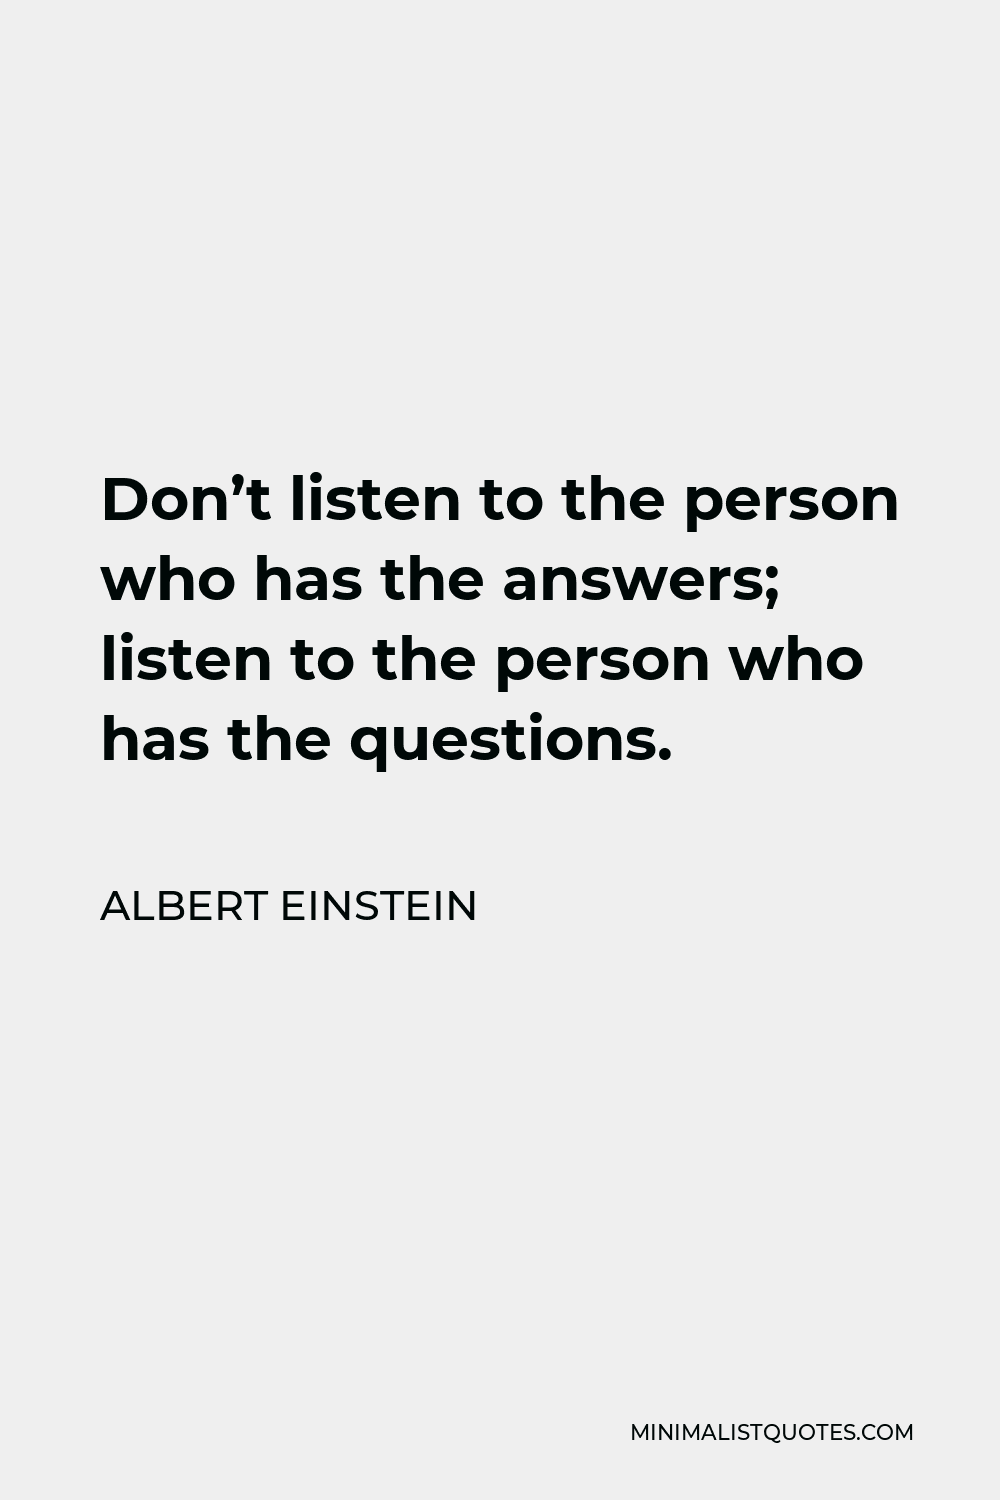 Albert Einstein Quote - Don’t listen to the person who has the answers; listen to the person who has the questions.